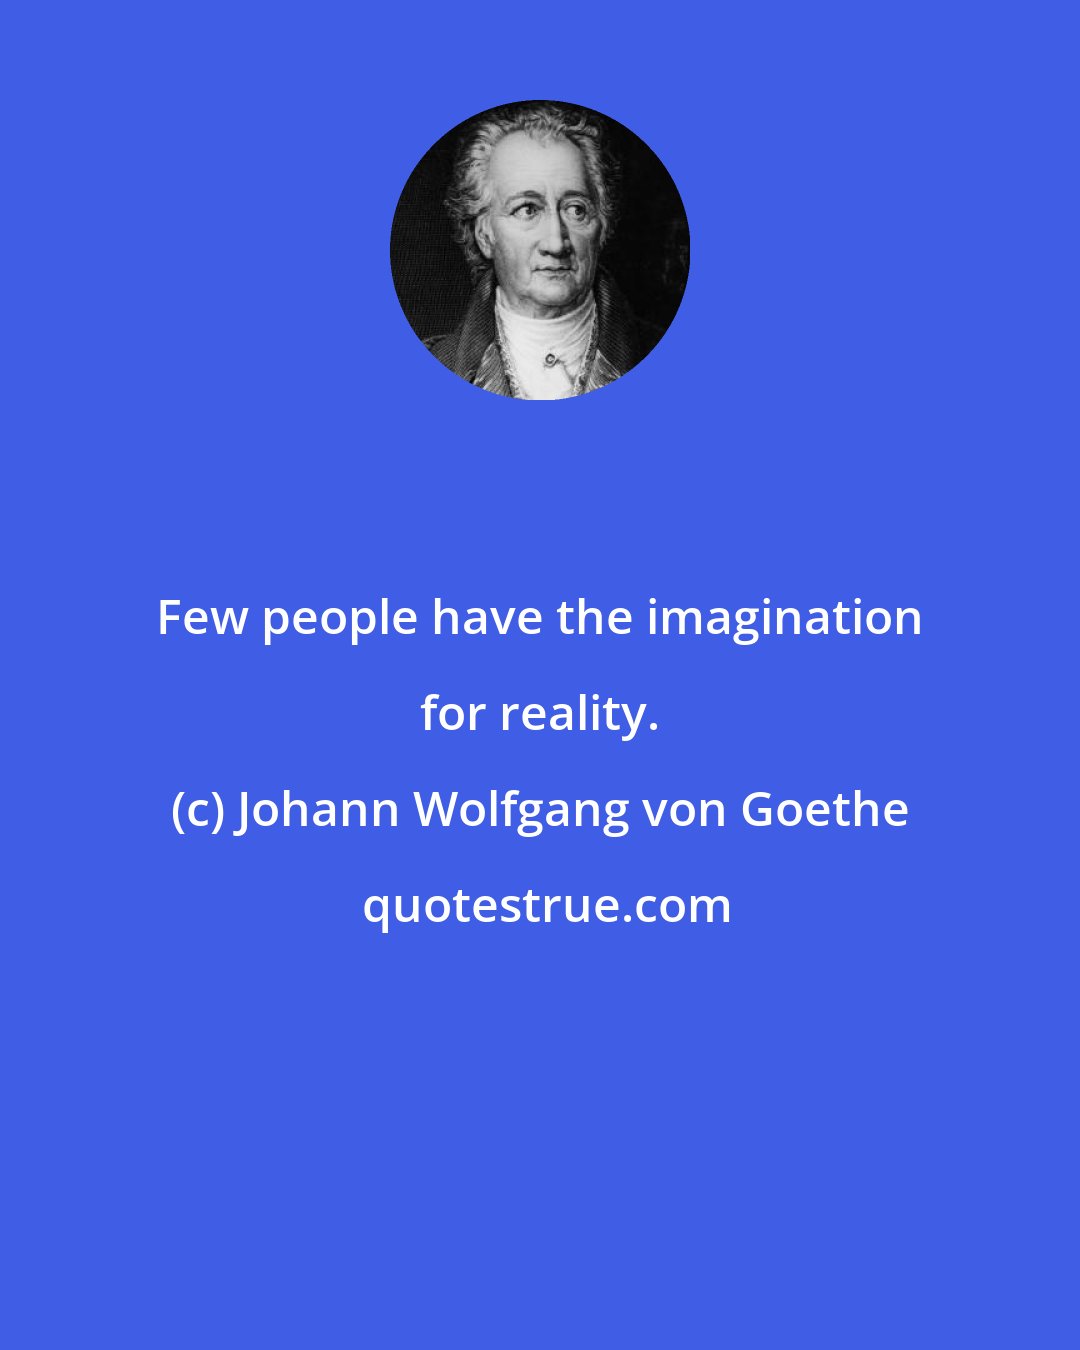 Johann Wolfgang von Goethe: Few people have the imagination for reality.